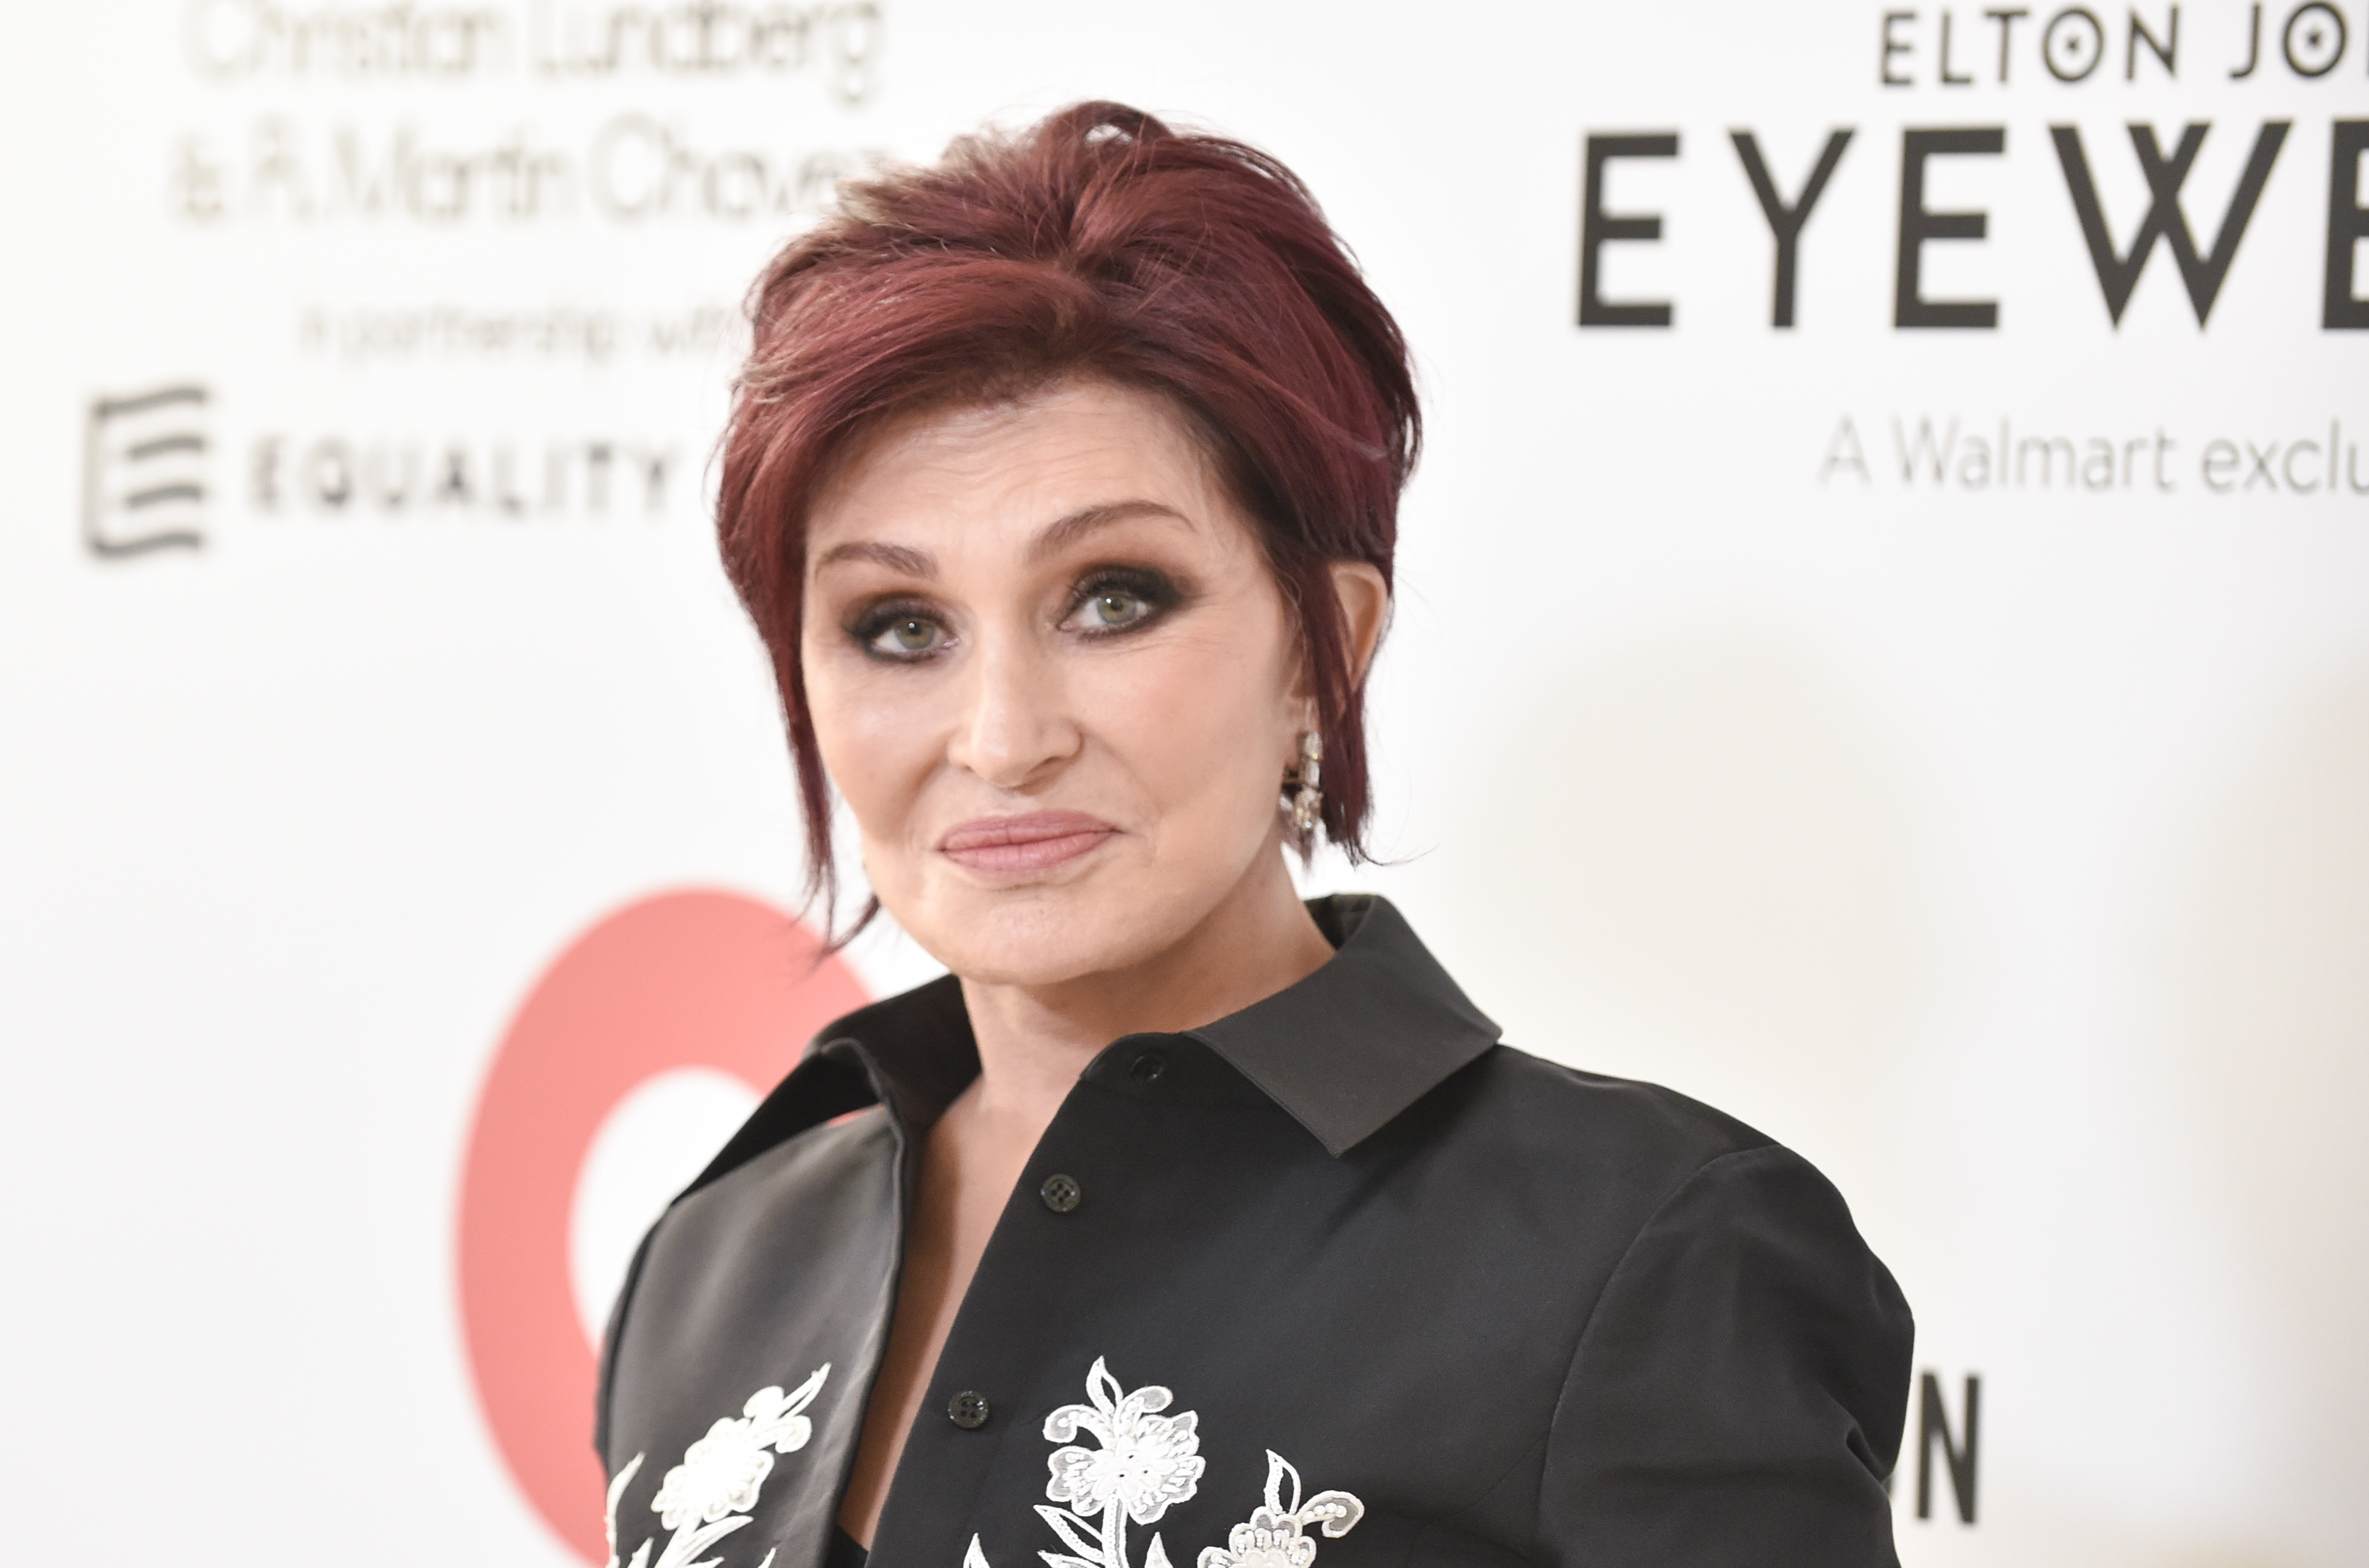 <p><span>"I had a full facelift done in October [2021] and I looked like one of those f****** mummies that they wrap [with bandages]," <a href="https://www.wonderwall.com/celebrity/profiles/overview/sharon-osbourne-1449.article">Sharon Osbourne</a> told London's <a href="https://www.thetimes.co.uk/article/sharon-osbourne-everyone-is-scared-of-saying-something-wrong-its-no-way-to-live-d72bgdlz2">The Sunday Times</a> in an April 2022 interview. "It hurt like hell. You have no idea." She shared that the surgery took five and a half hours left her looking "horrendous." She was so unhappy that she told her surgeon, "'You've got to be f****** joking,'" she said. "One eye was different to the other. I looked like a f****** Cyclops. I'm, like, 'All I need is a hunchback.'" She said husband Ozzy Osbourne was supportive. "He said, 'I don't care how much it costs, we'll get it redone,'" she said. However, within months, she realized her face was "settling" and she soon felt pleased with the results. Sharon and her new face are seen here in March 2022 about five months after what's believed to be her fifth facelift.</span></p>